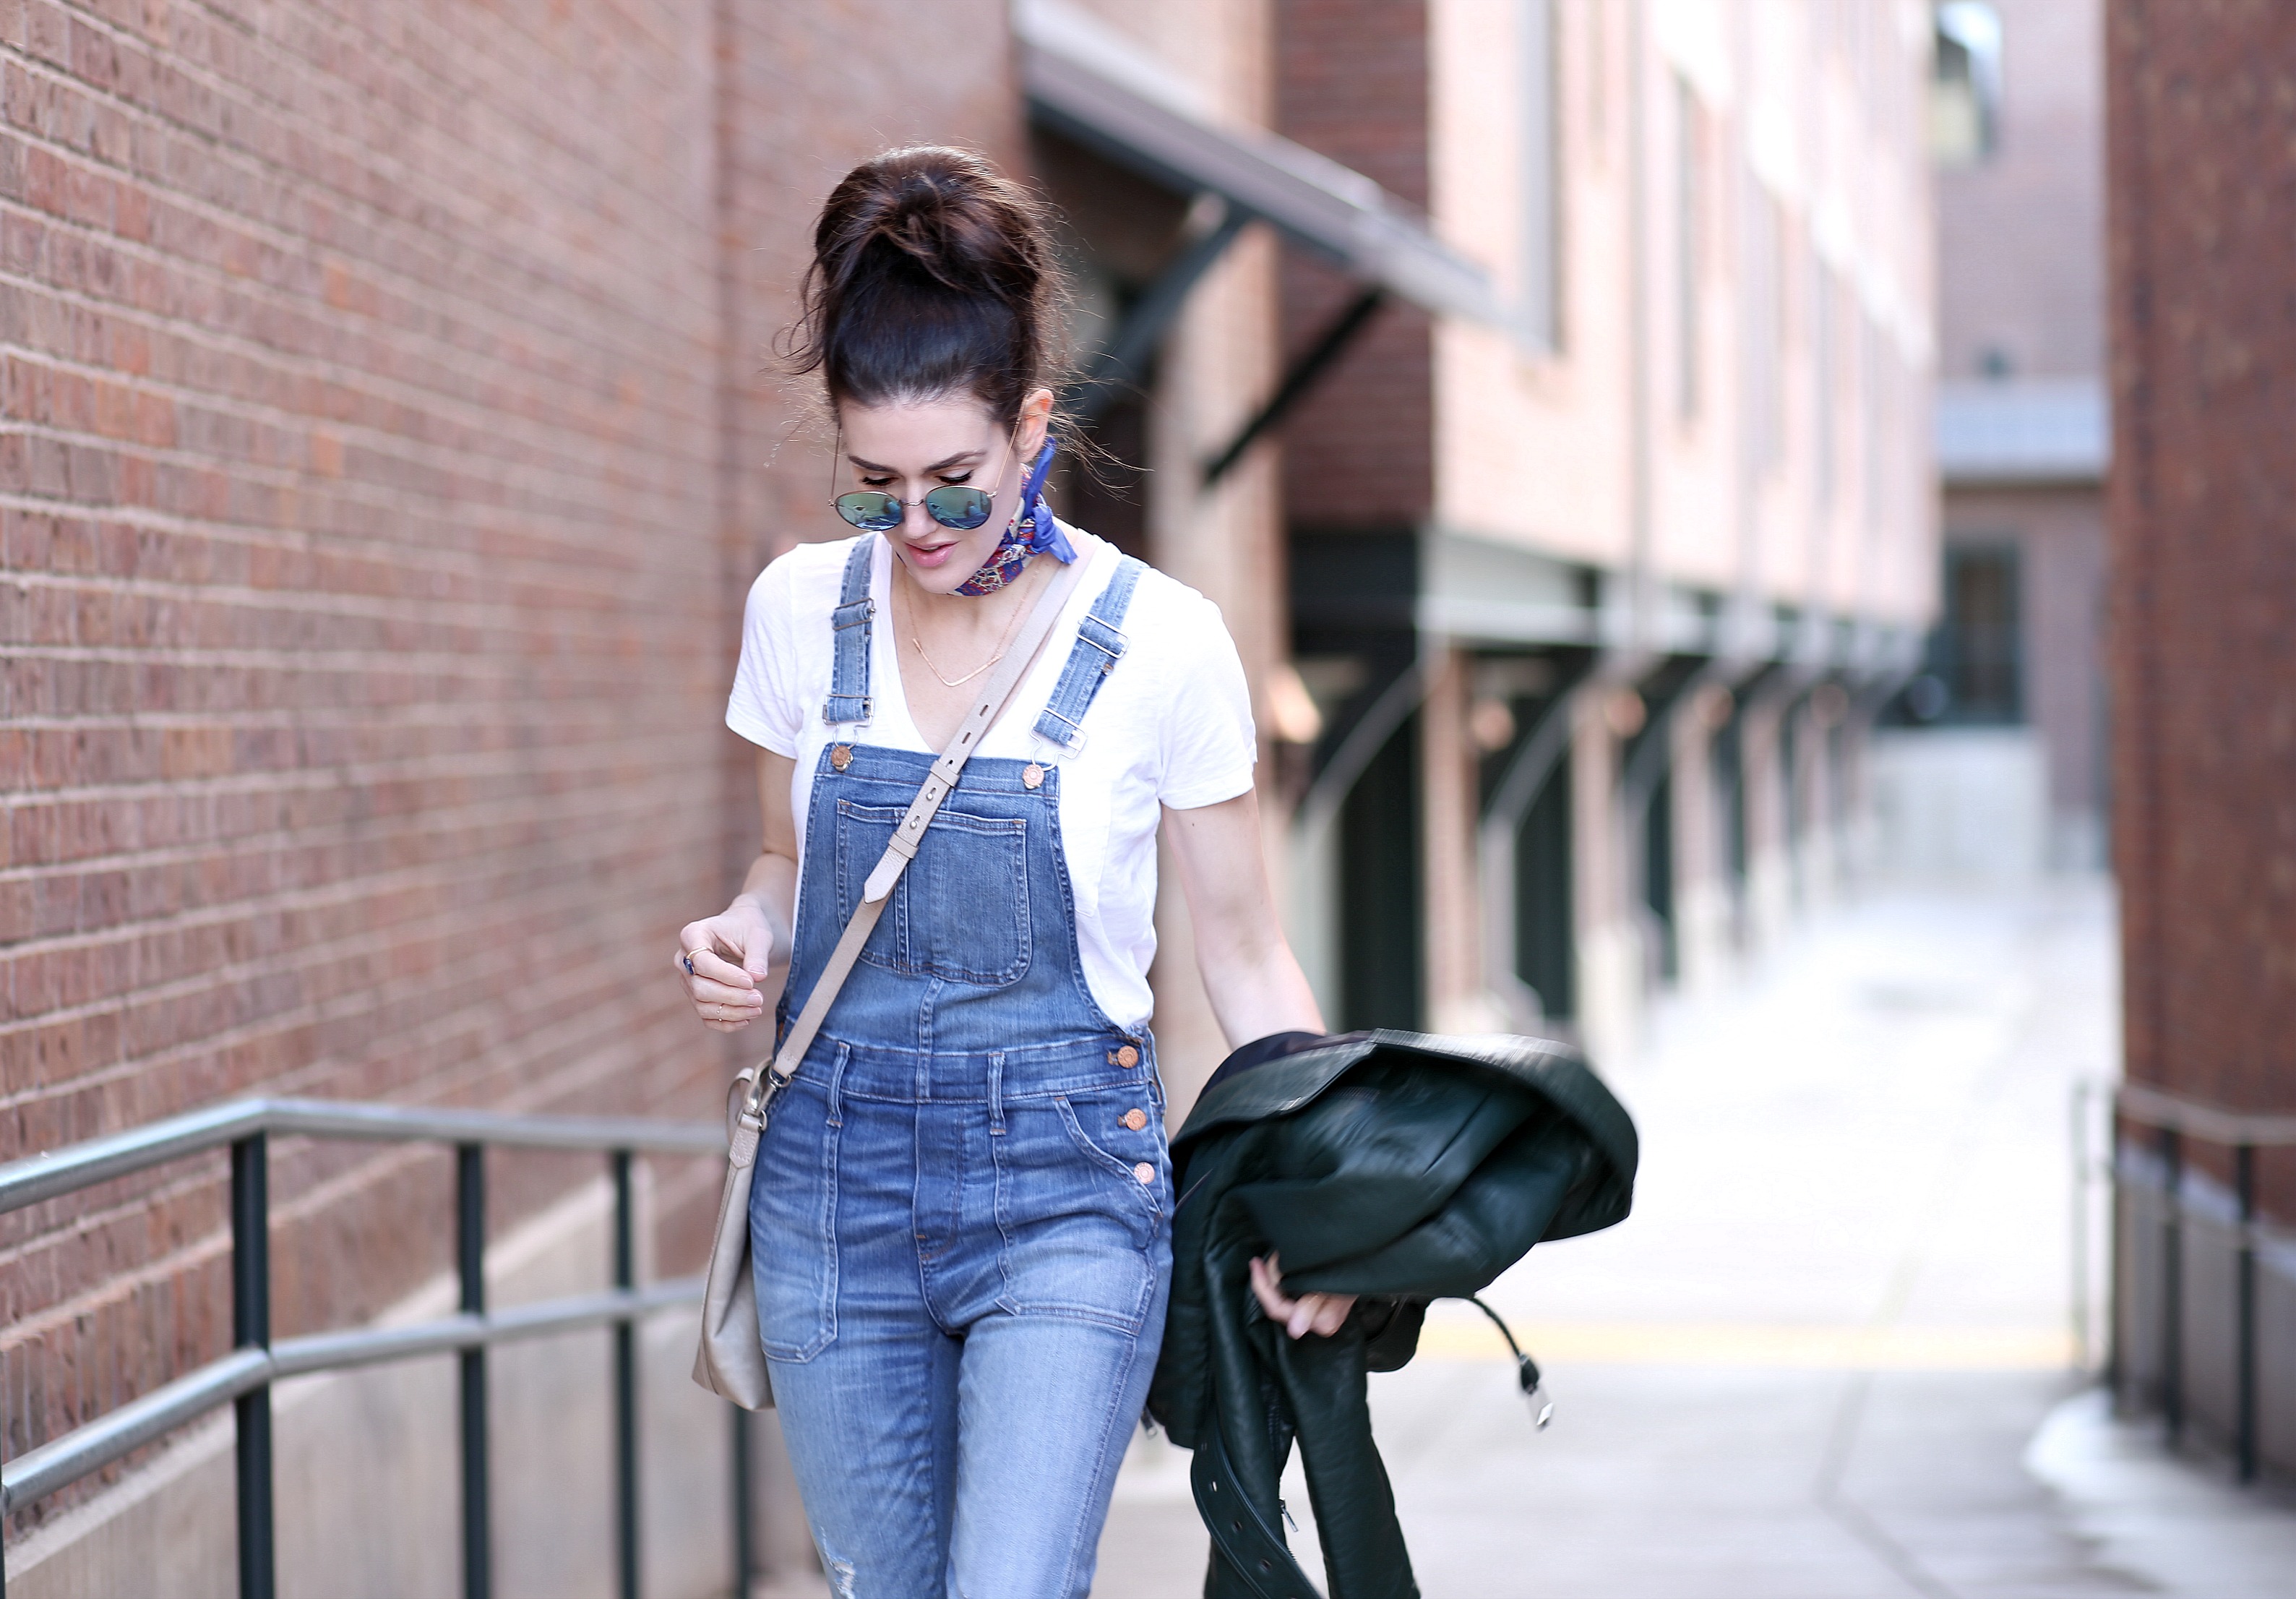 Overalls + Boots 7a